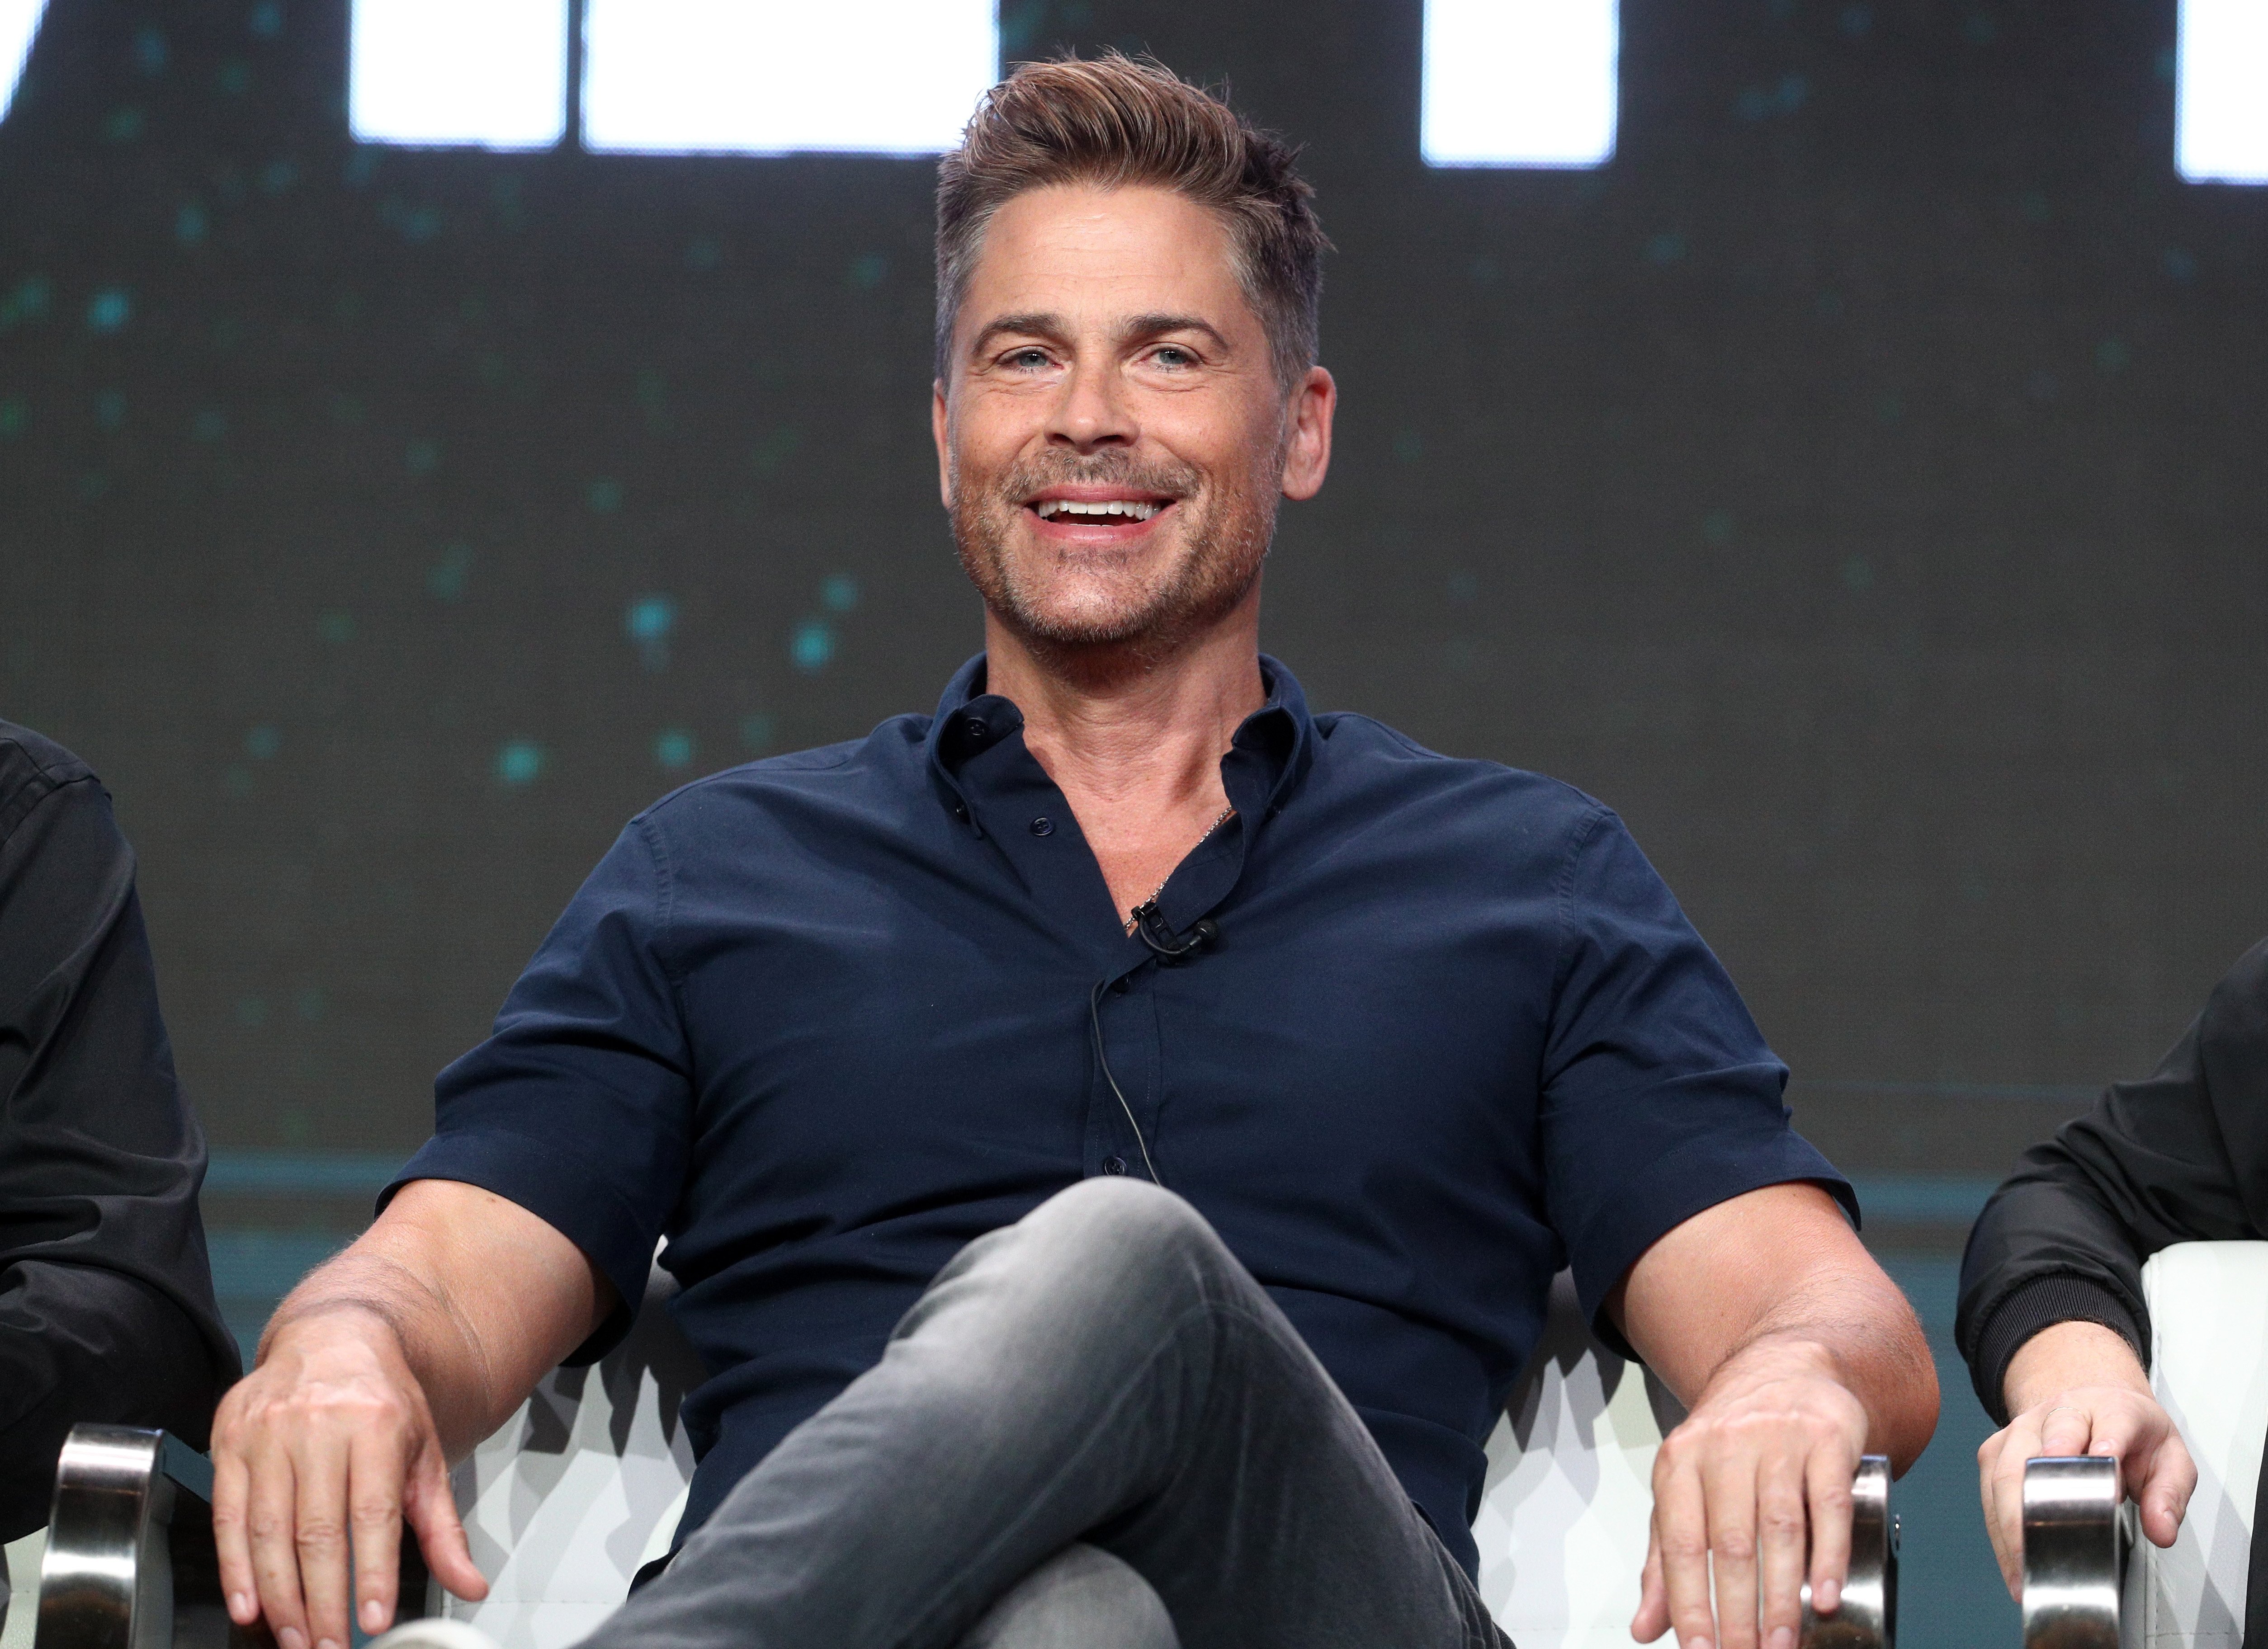 Rob Lowe pictured onstage during the A+E portion of the screening of "The Lowe Files." 2017, California. | Photo: Getty Images